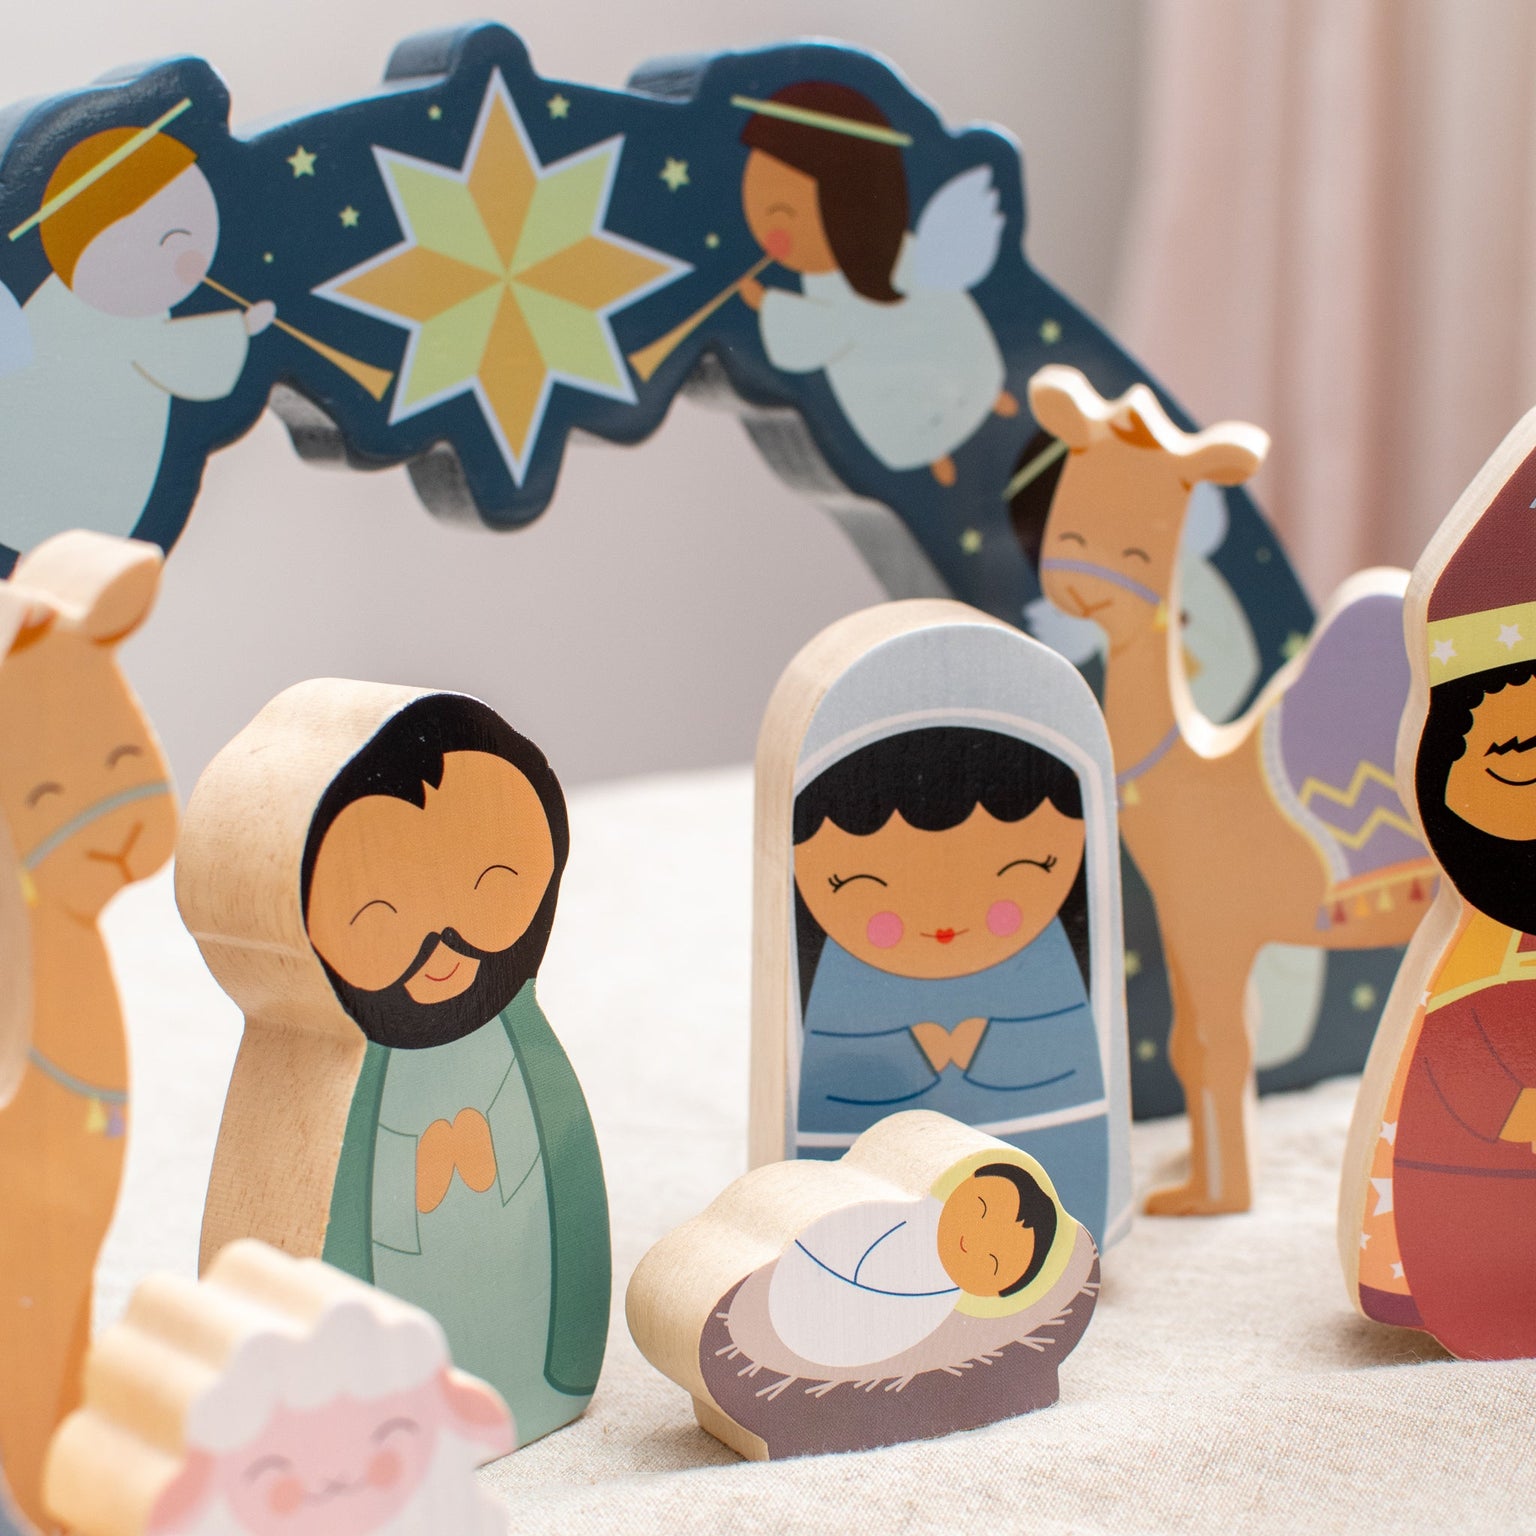 Deluxe Christmas Nativity Wooden Playset